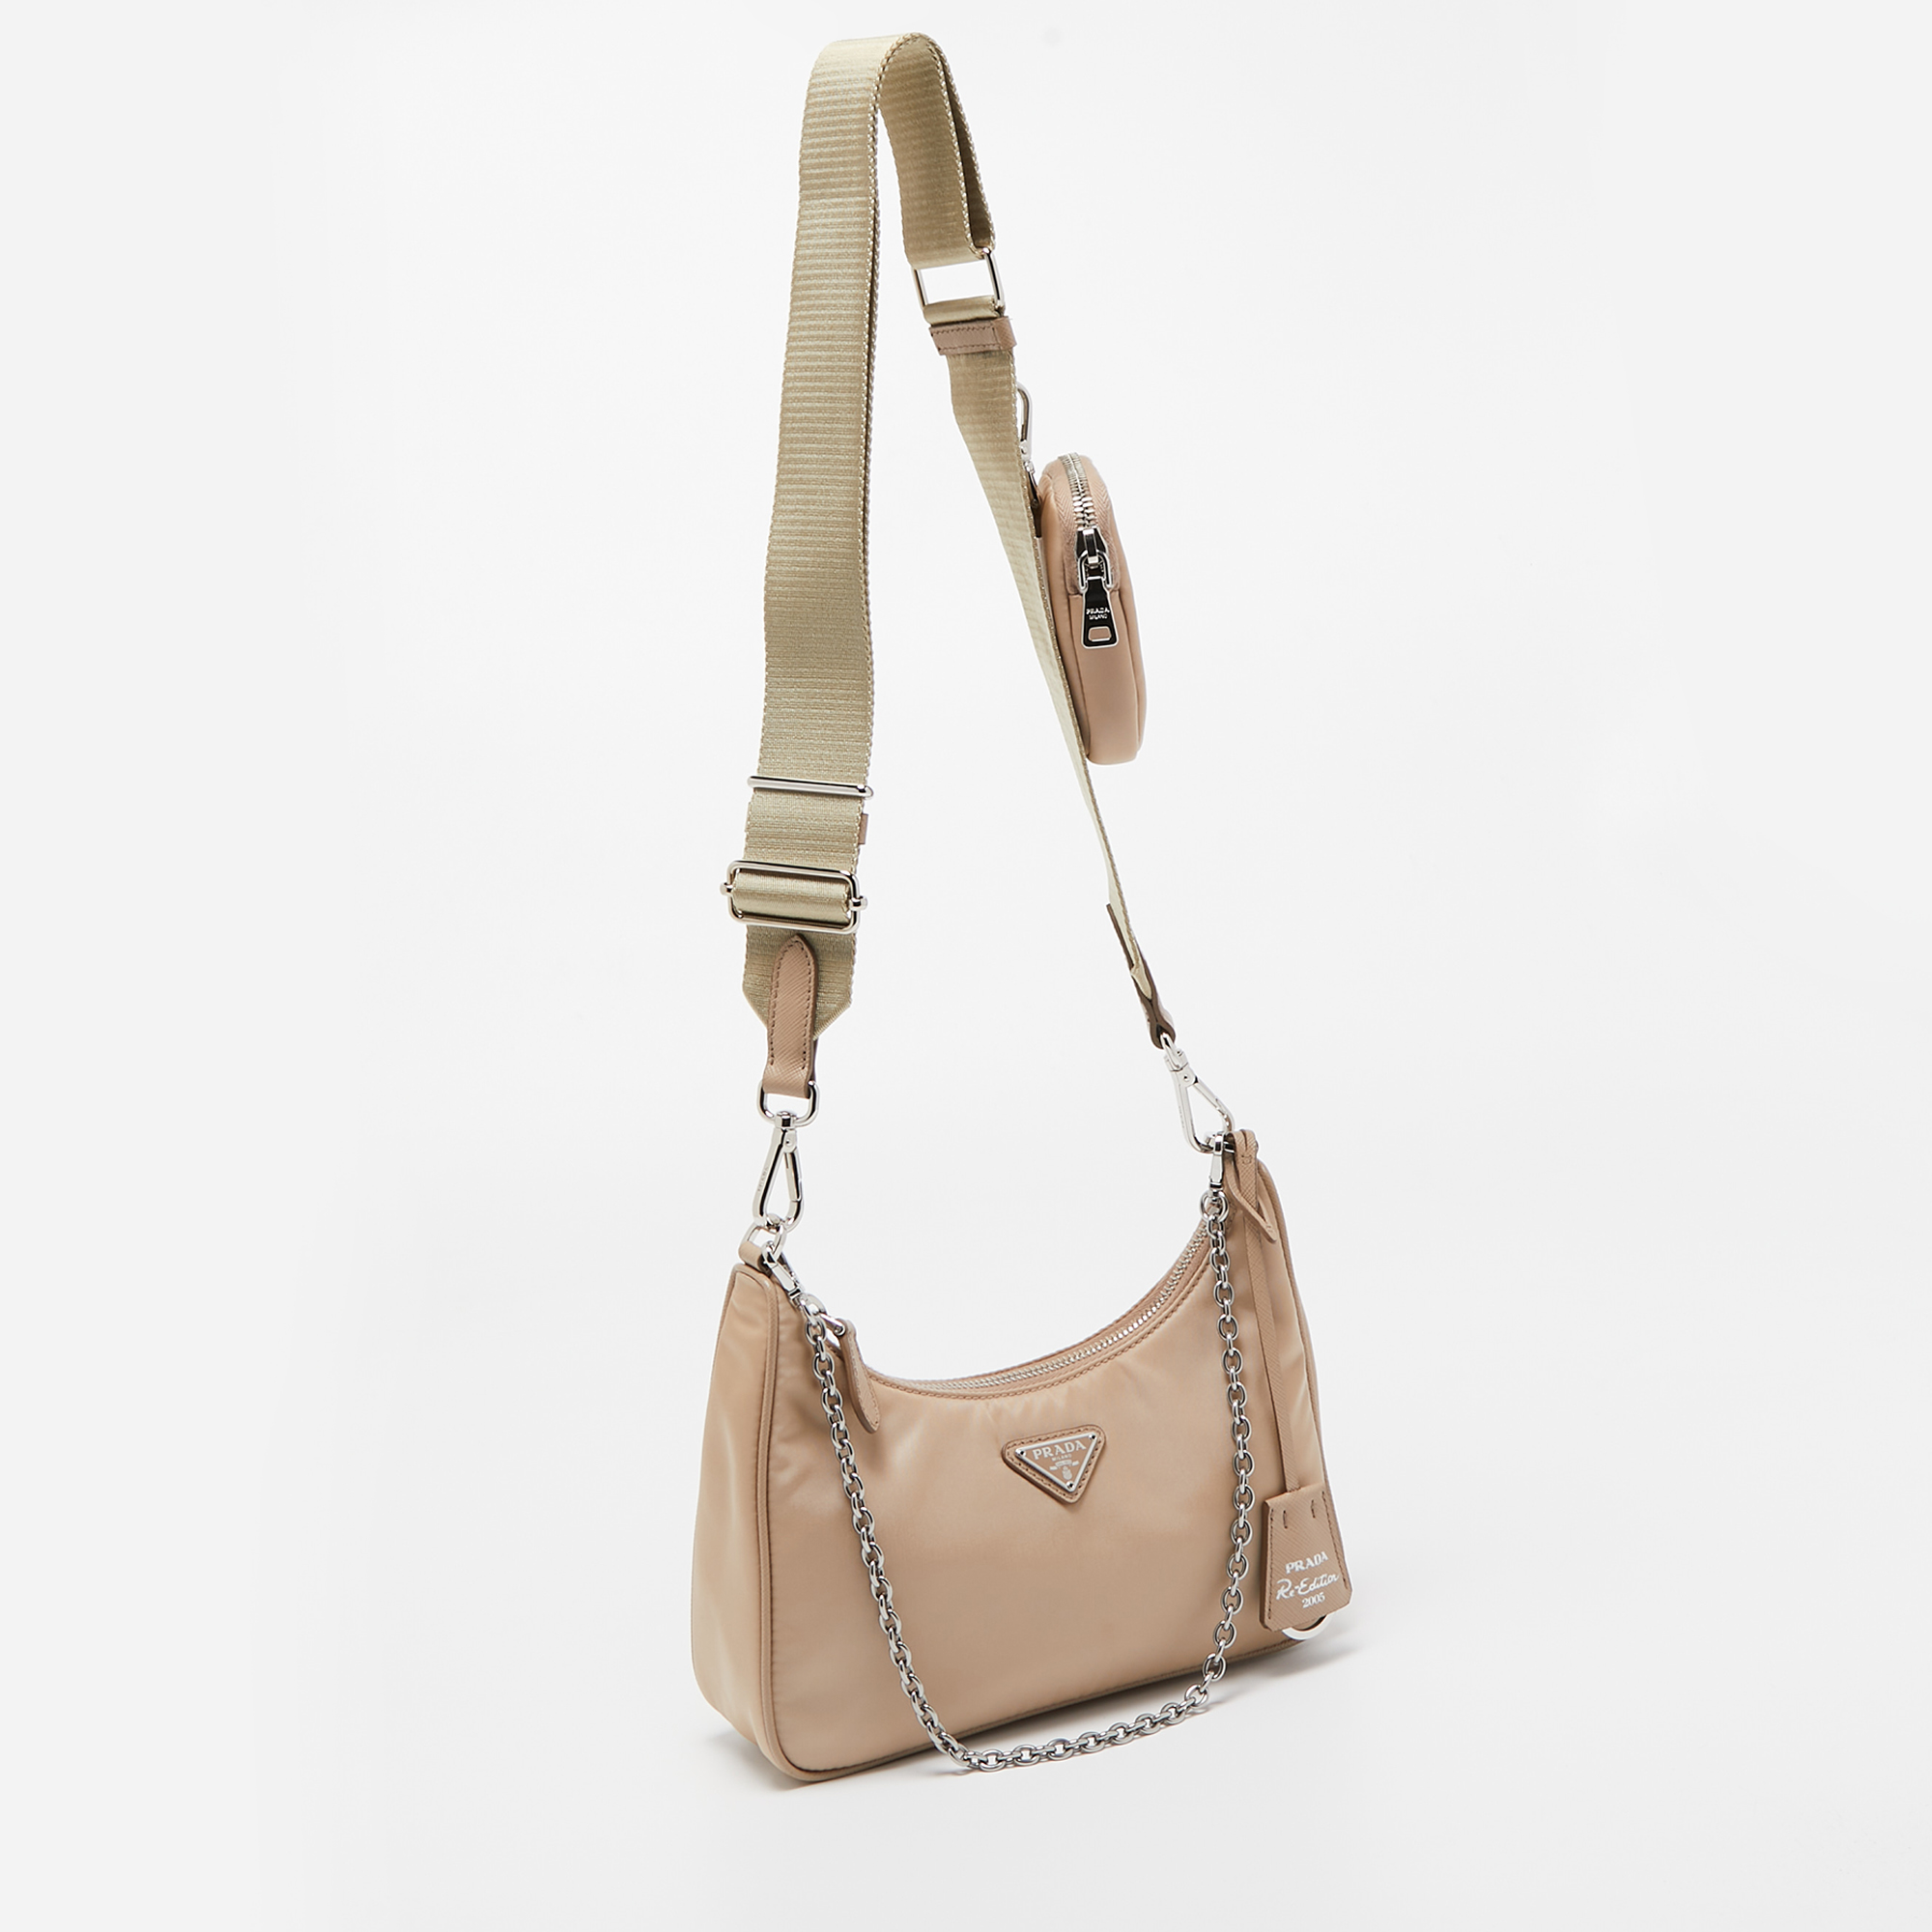 Prada Beige Nylon And Leather Re-Edition 2005 Baguette Bag